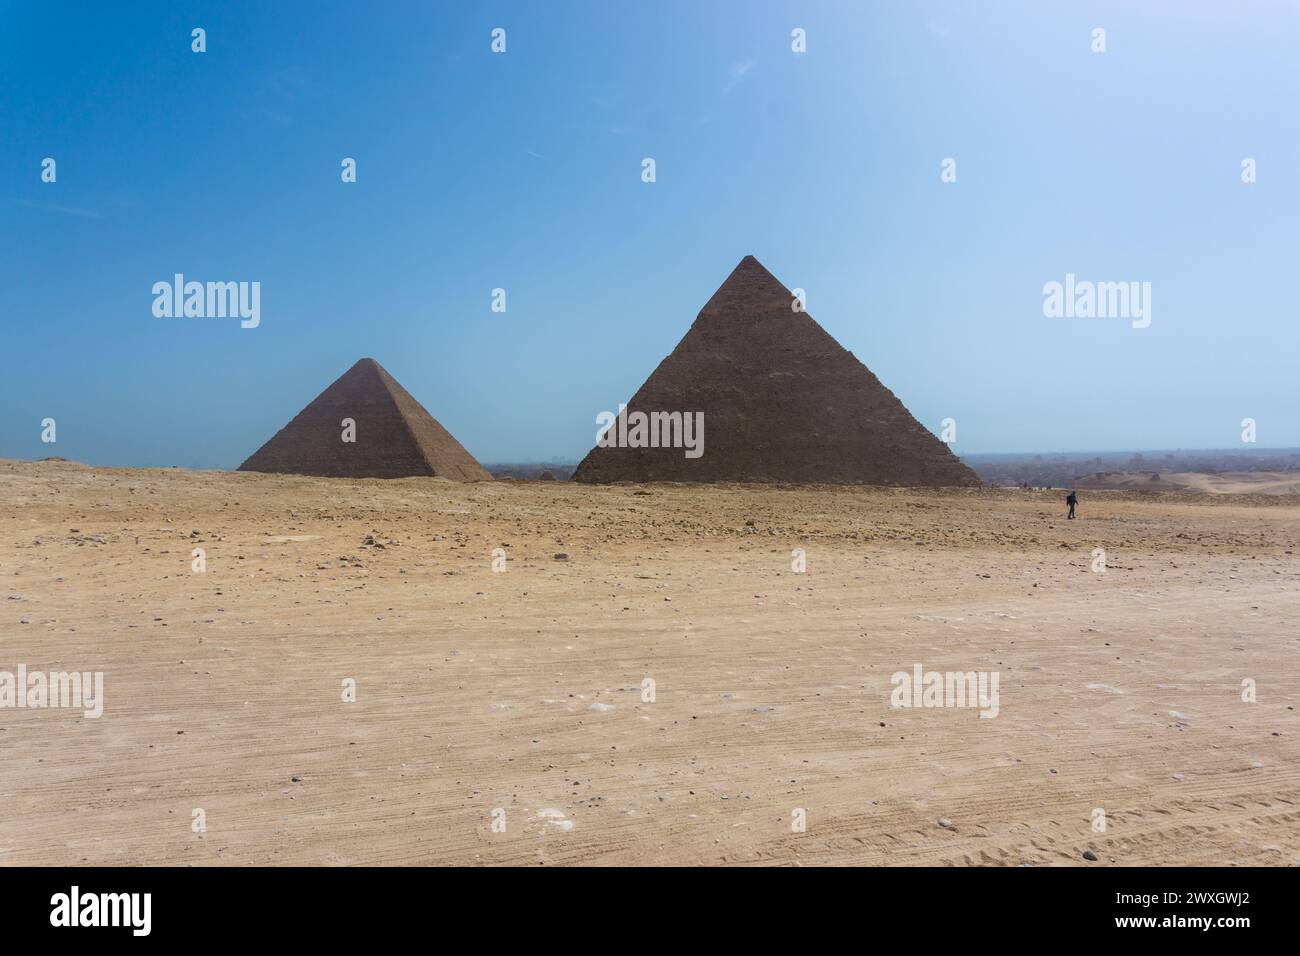 Desert view with Pyramid of Khafre, and the Pyramid of Menkaure, Giza ...